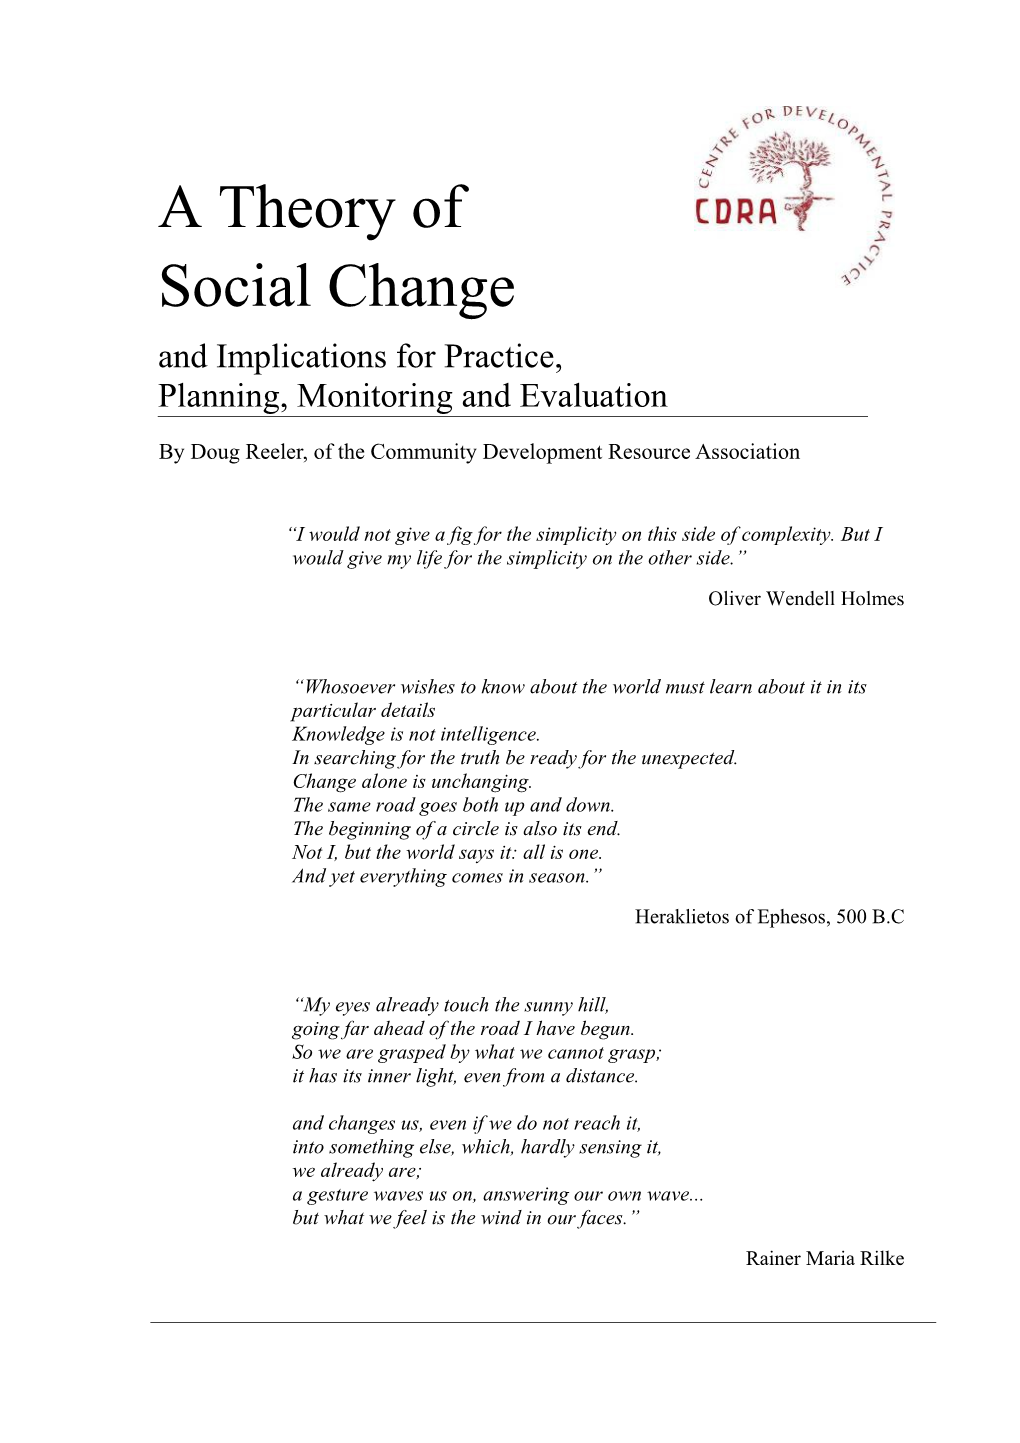 A Theory of Social Change